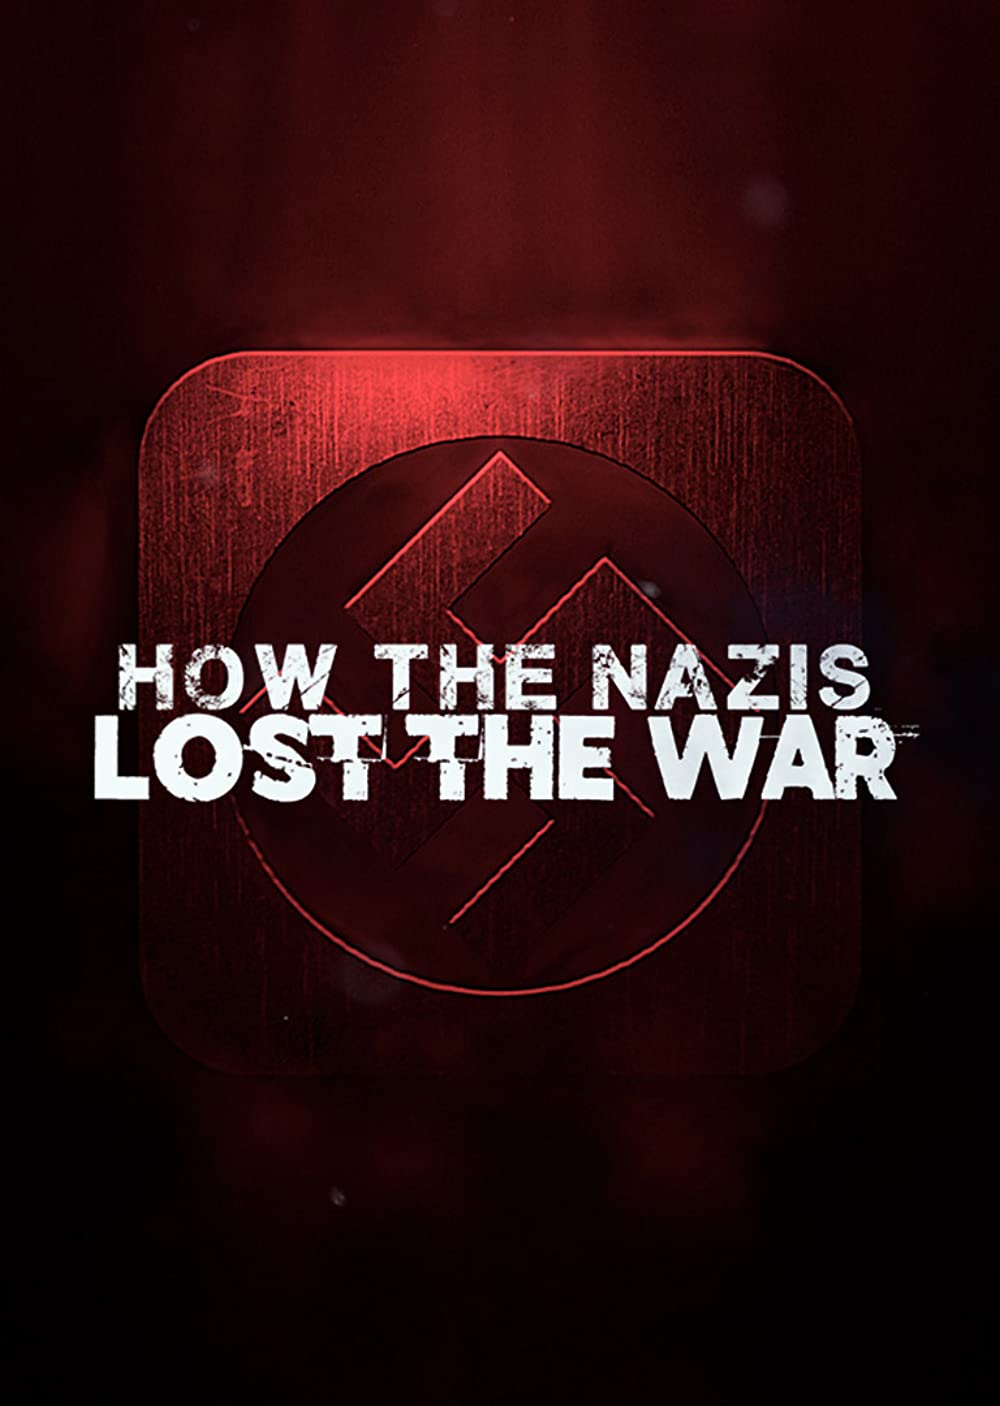 How the Nazis Lost the War S01E01 GG NLSUBBED WEB-DL x264-KHN-DDF